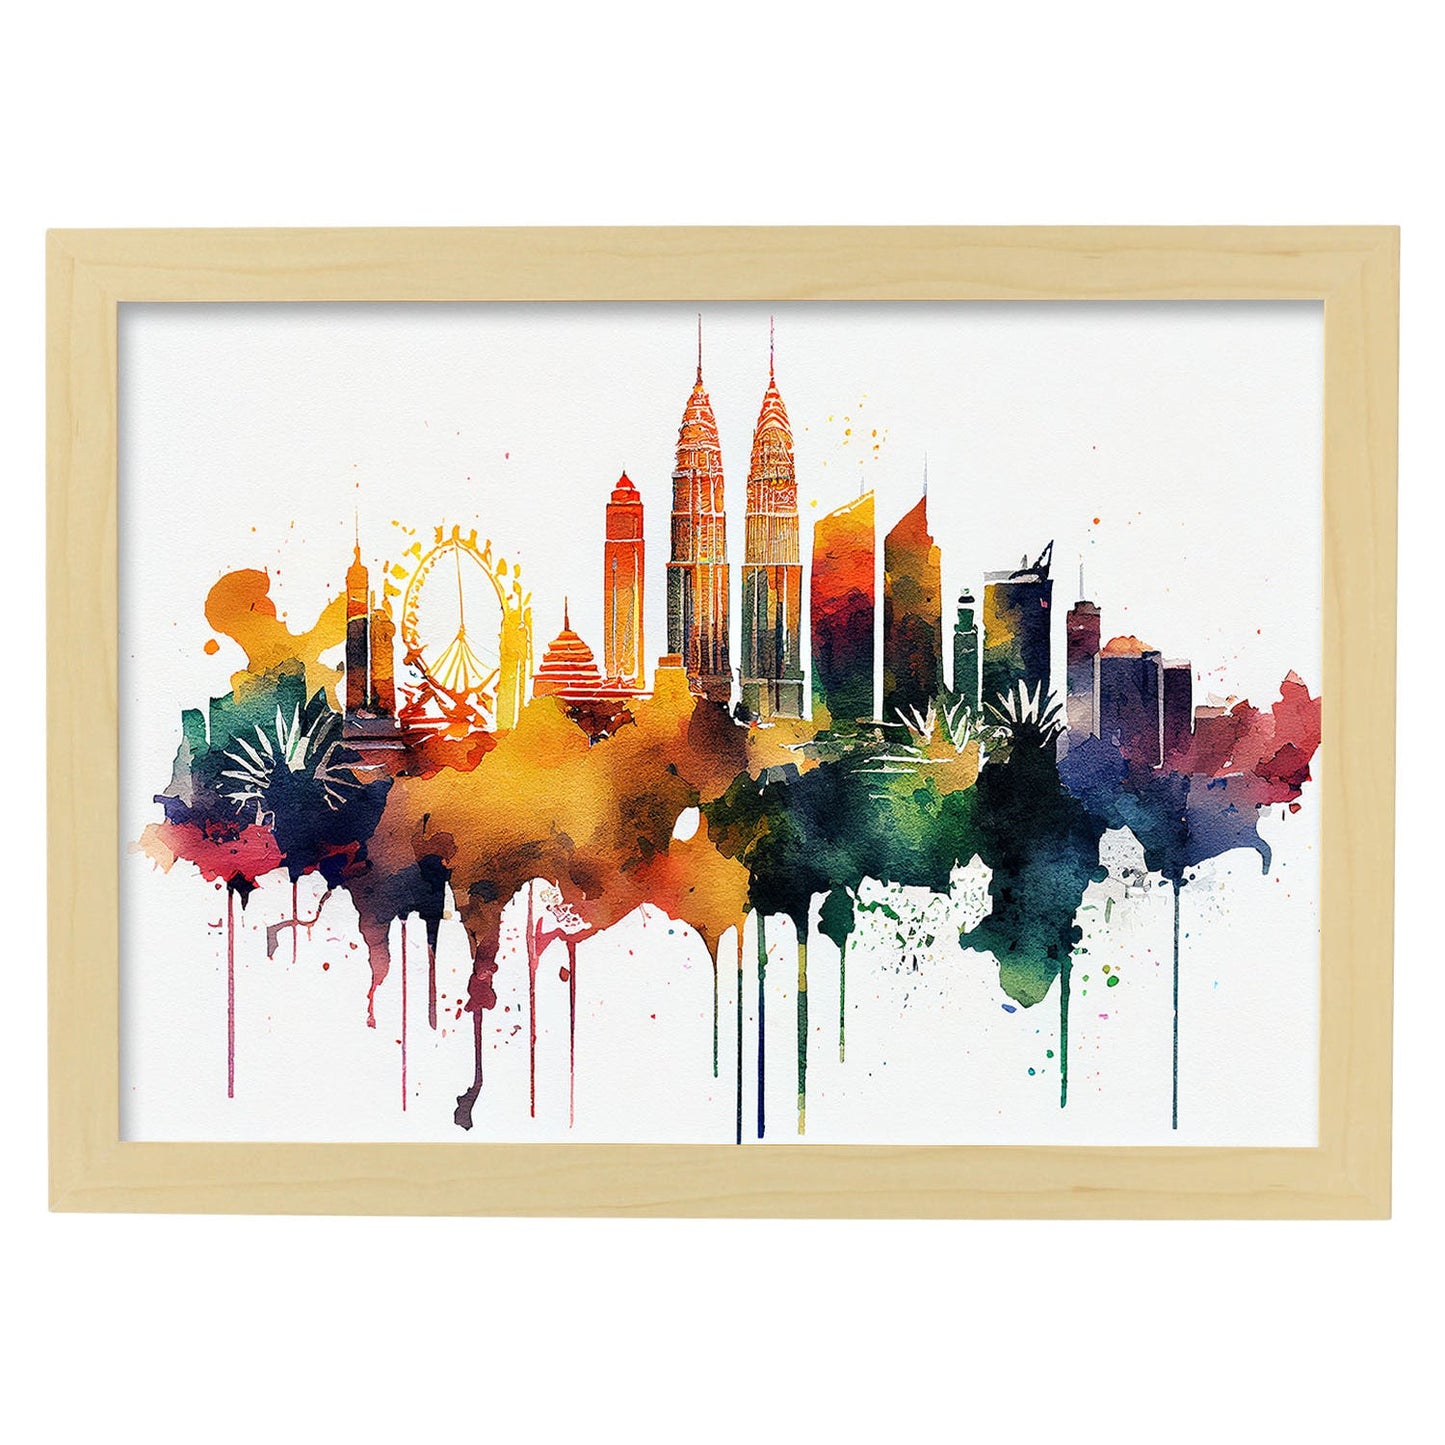 Nacnic watercolor of a skyline of the city of Kuala Lumpur_4. Aesthetic Wall Art Prints for Bedroom or Living Room Design.-Artwork-Nacnic-A4-Marco Madera Clara-Nacnic Estudio SL